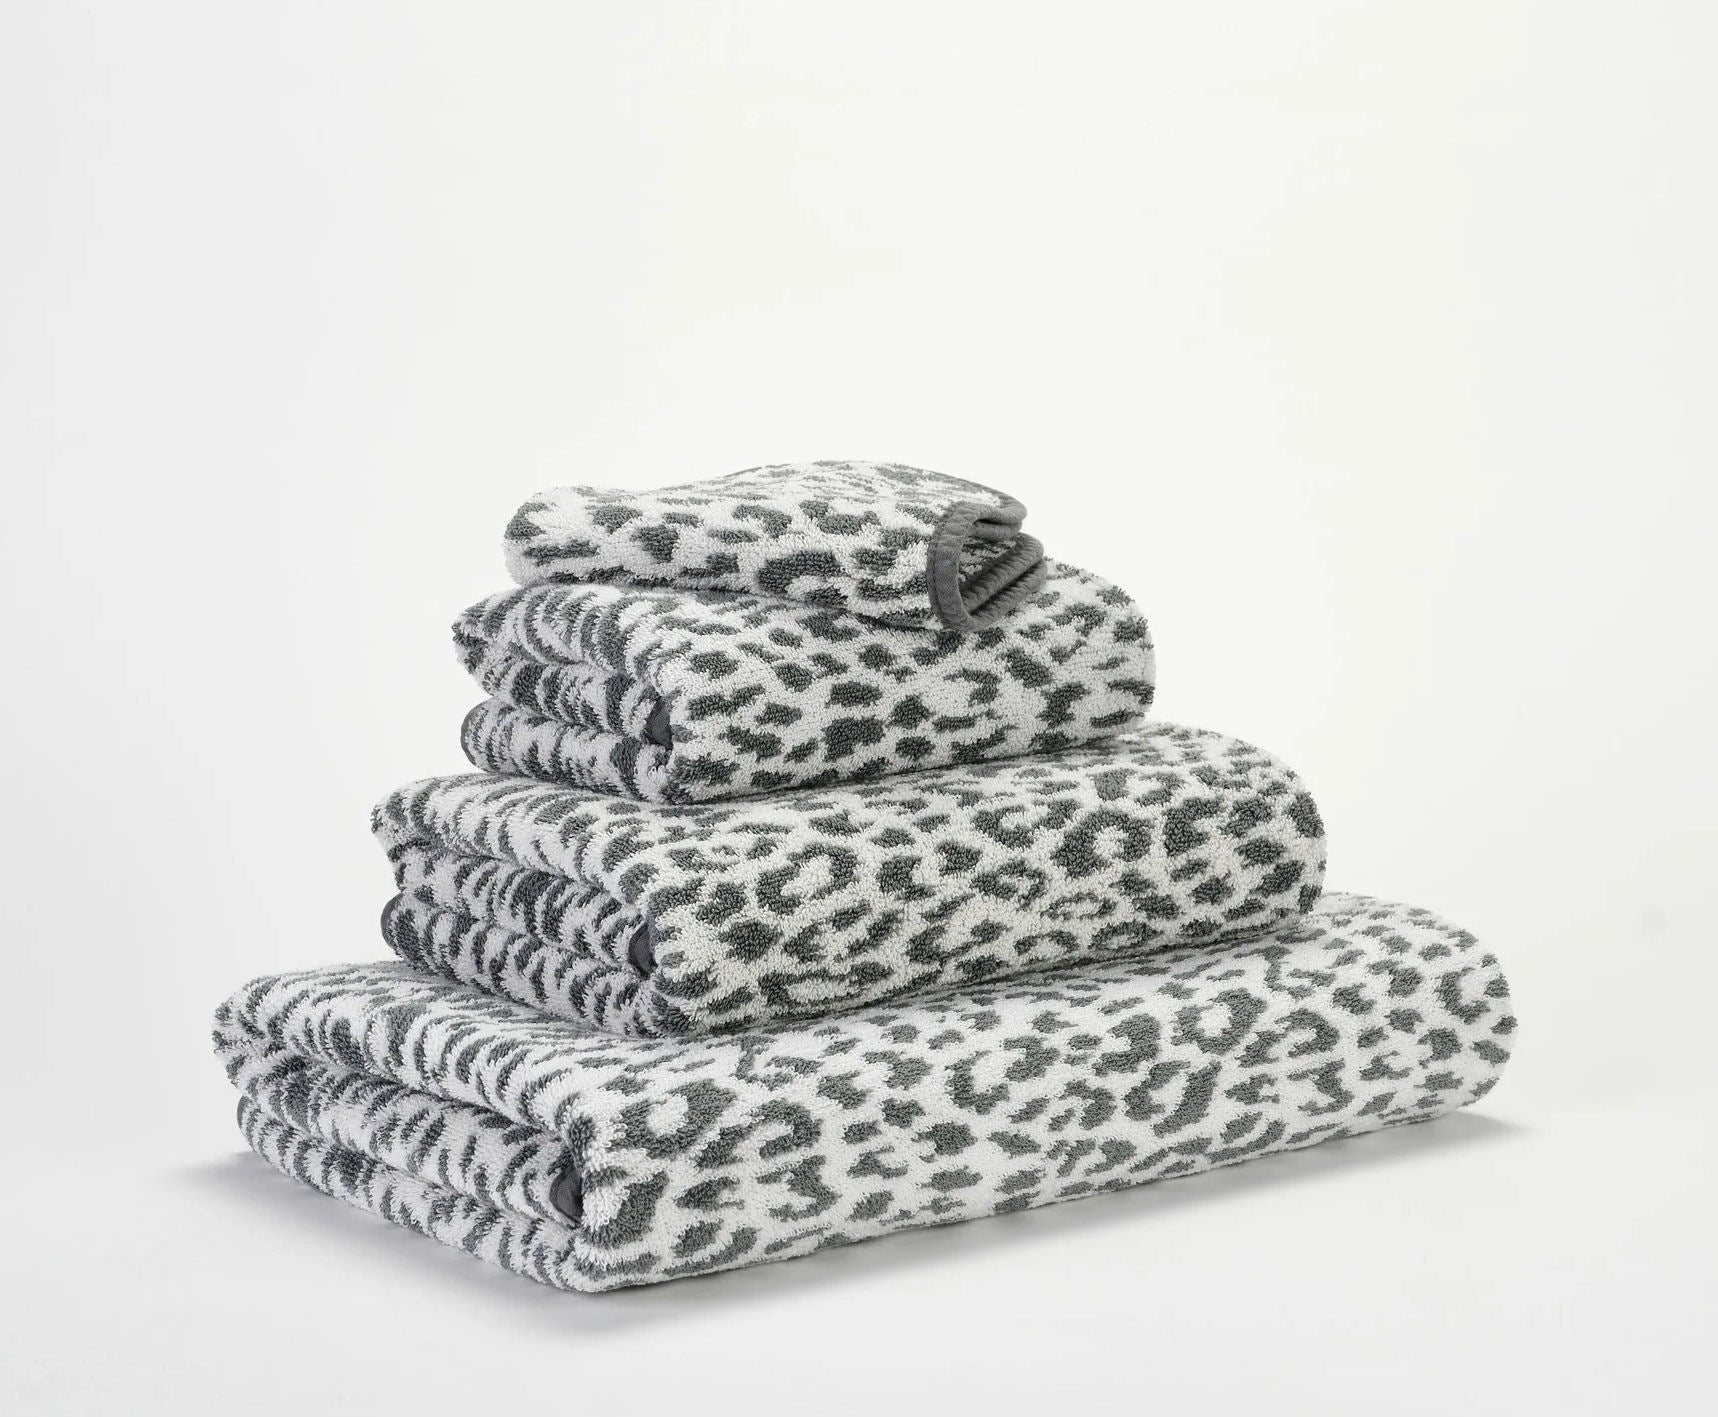 Grey Animal Print Zimba Towels by Abyss & Habidecor / Gris - |VESIMI Design| Luxury and Rustic bathrooms online